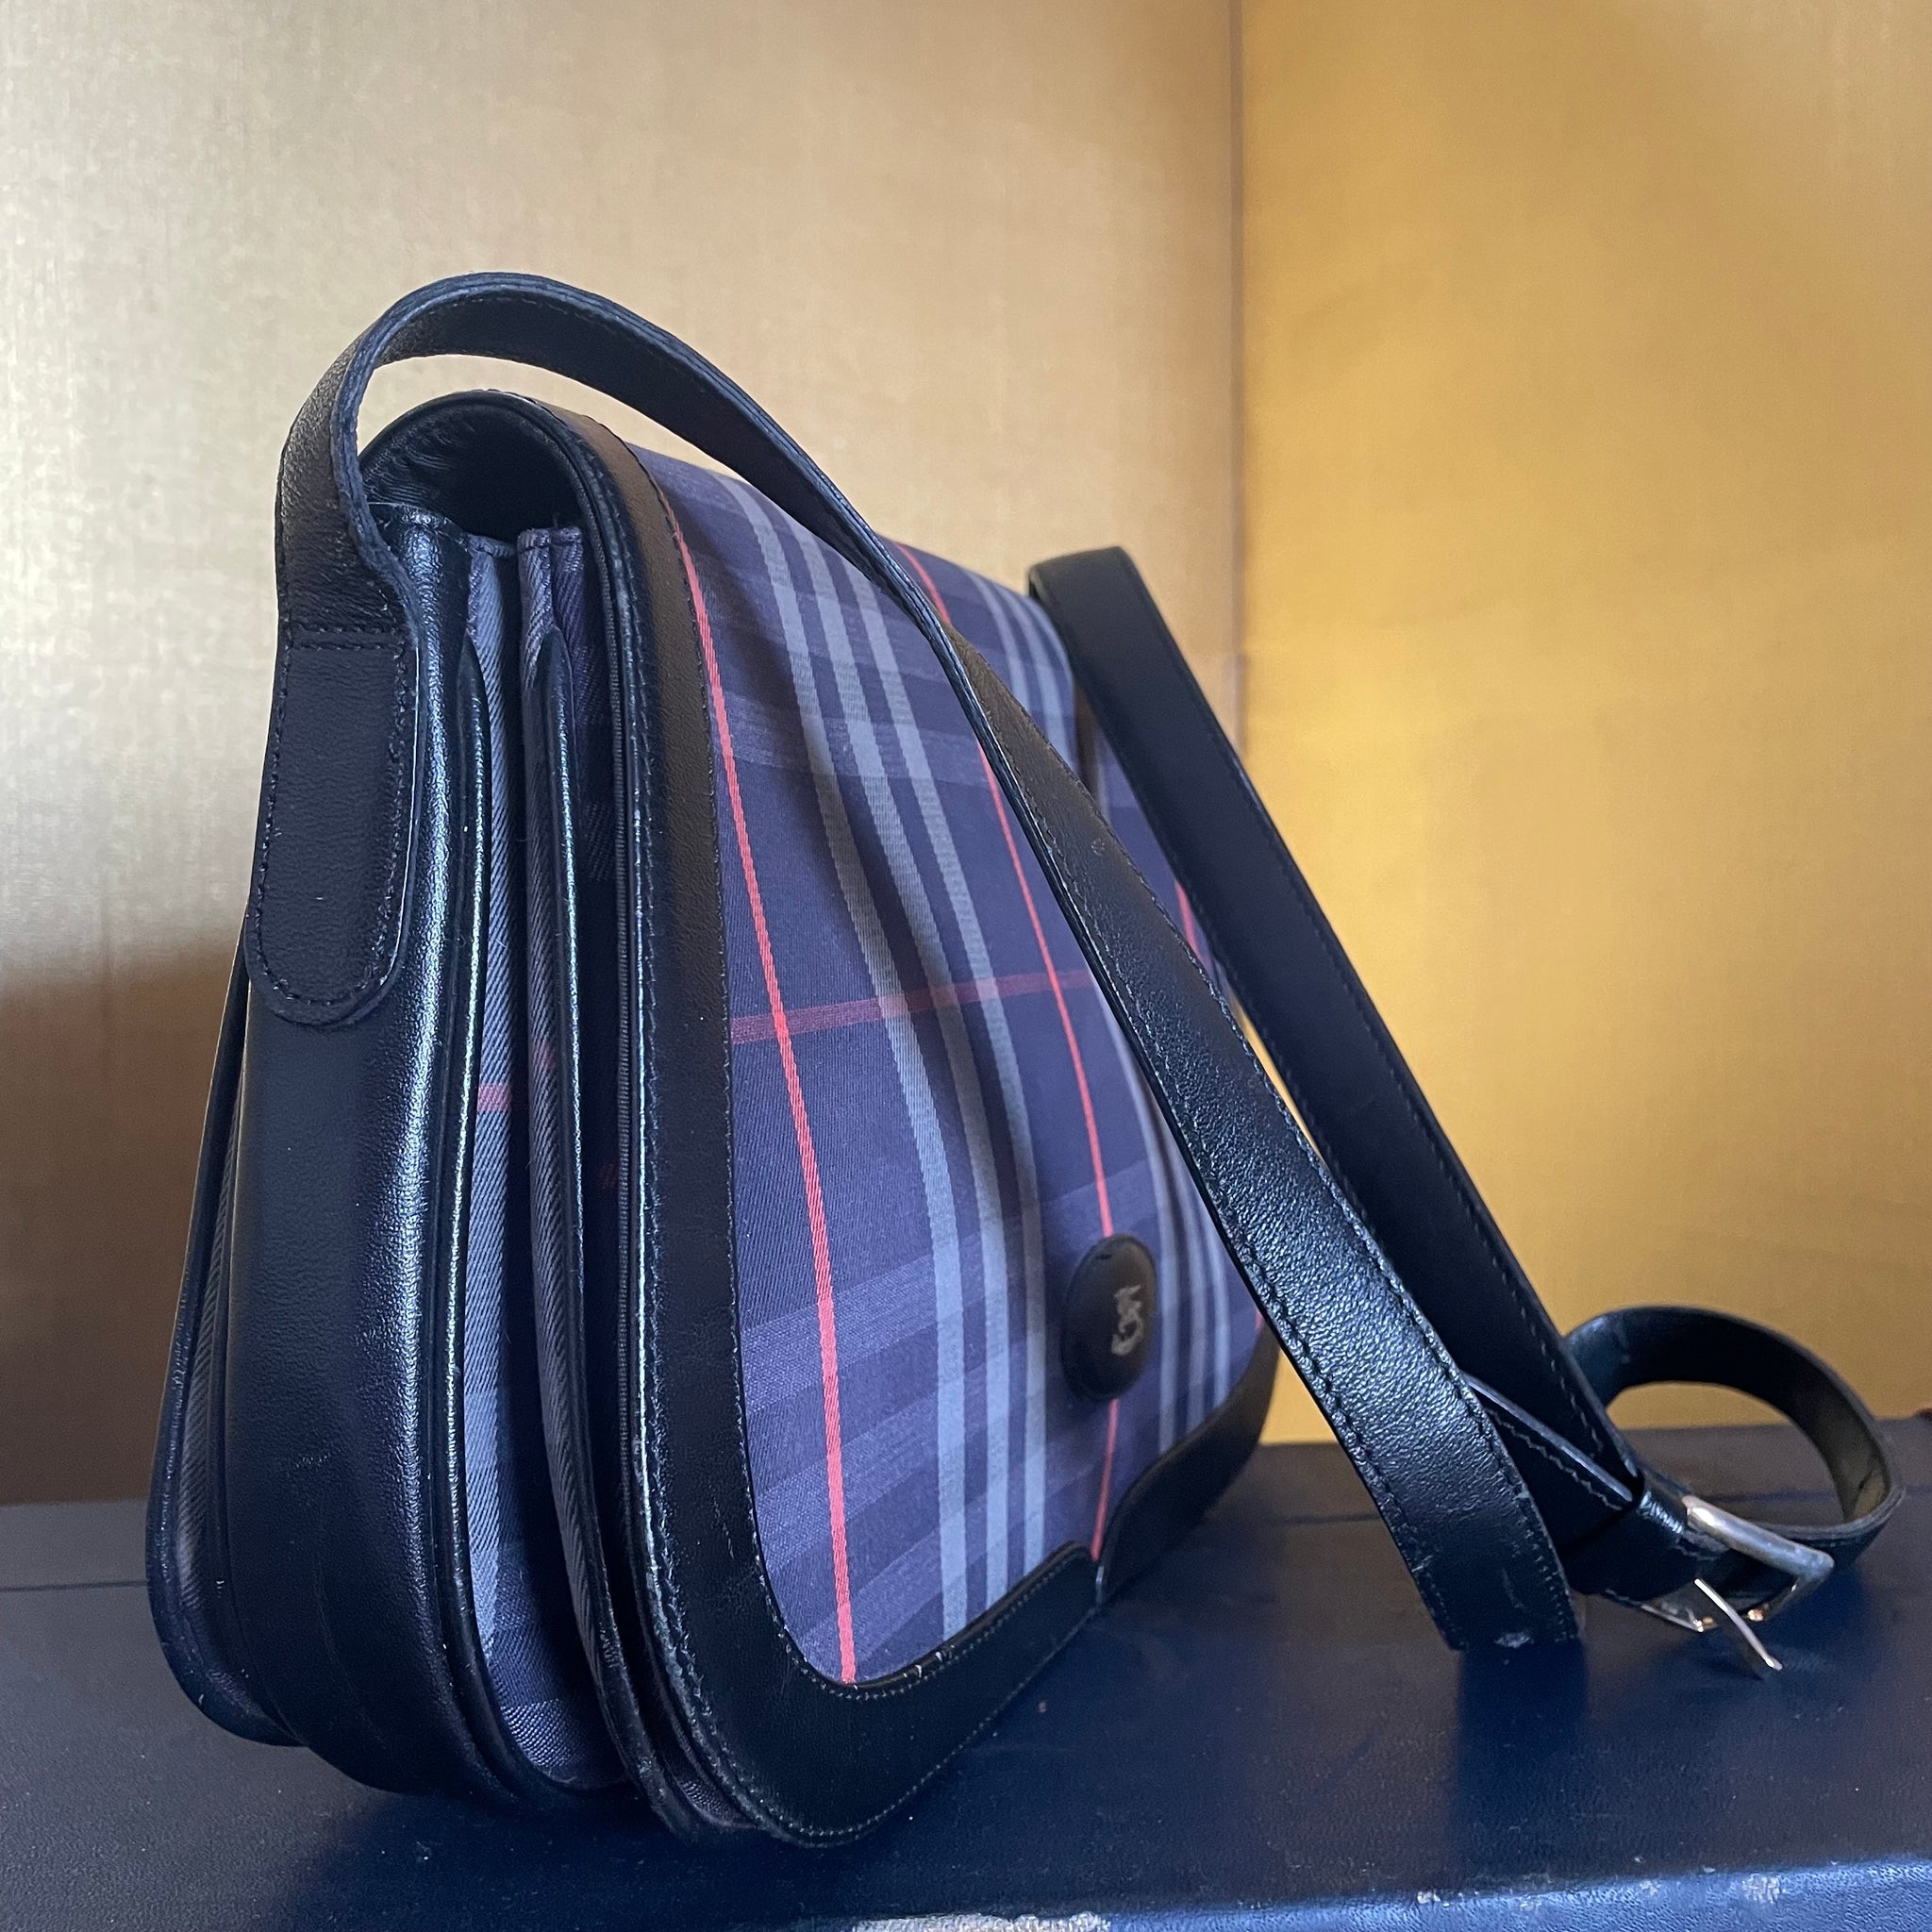 Faraday bag with window for phones – MOS Equipment